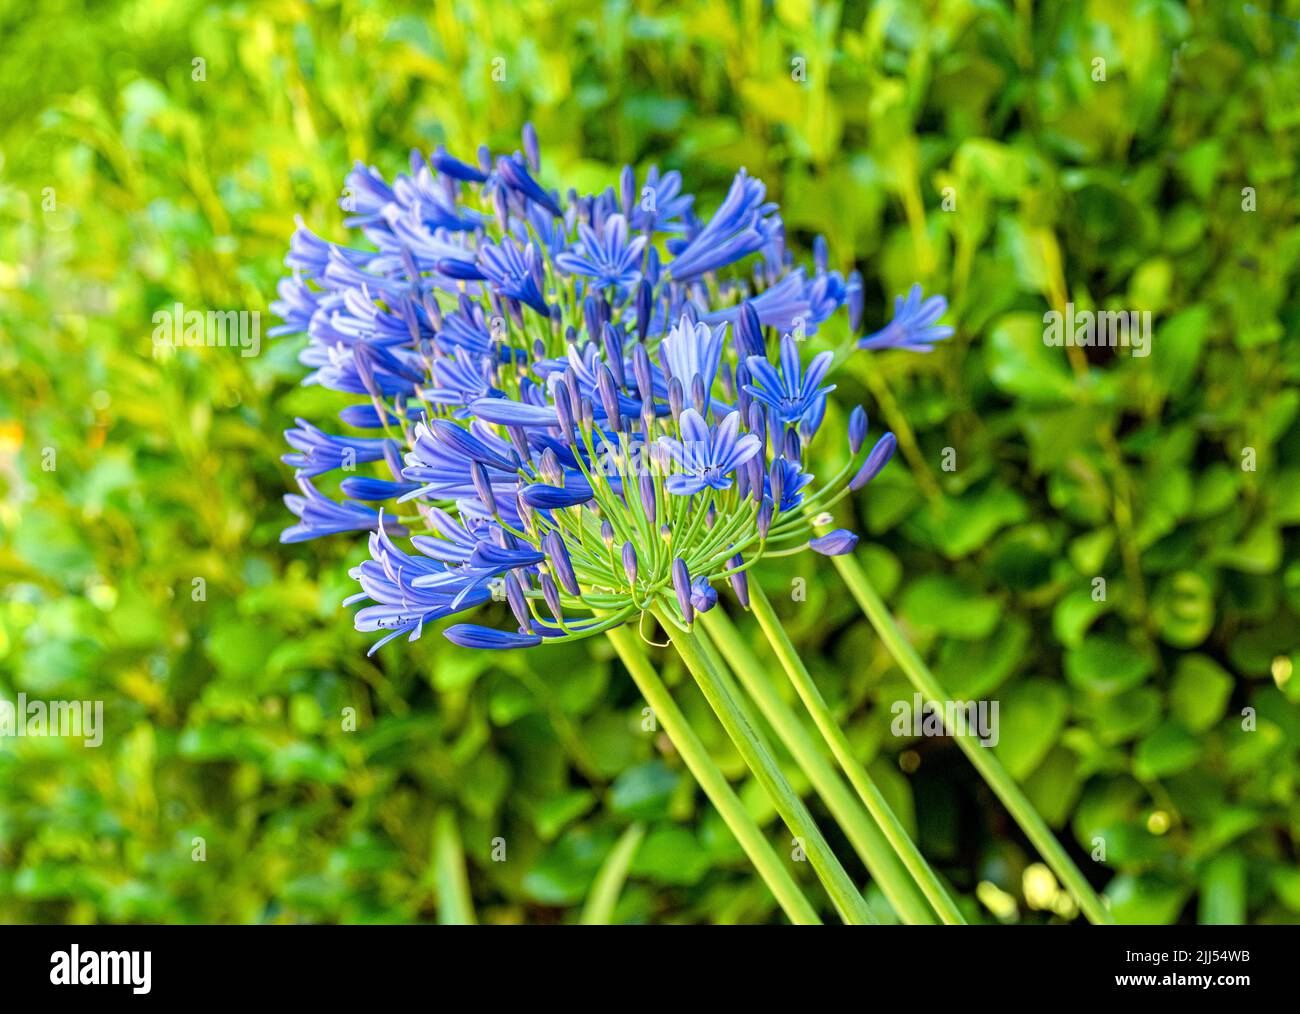 African lily (Agapanthus) purple flowers also called Lily of the Nile Stock Photo